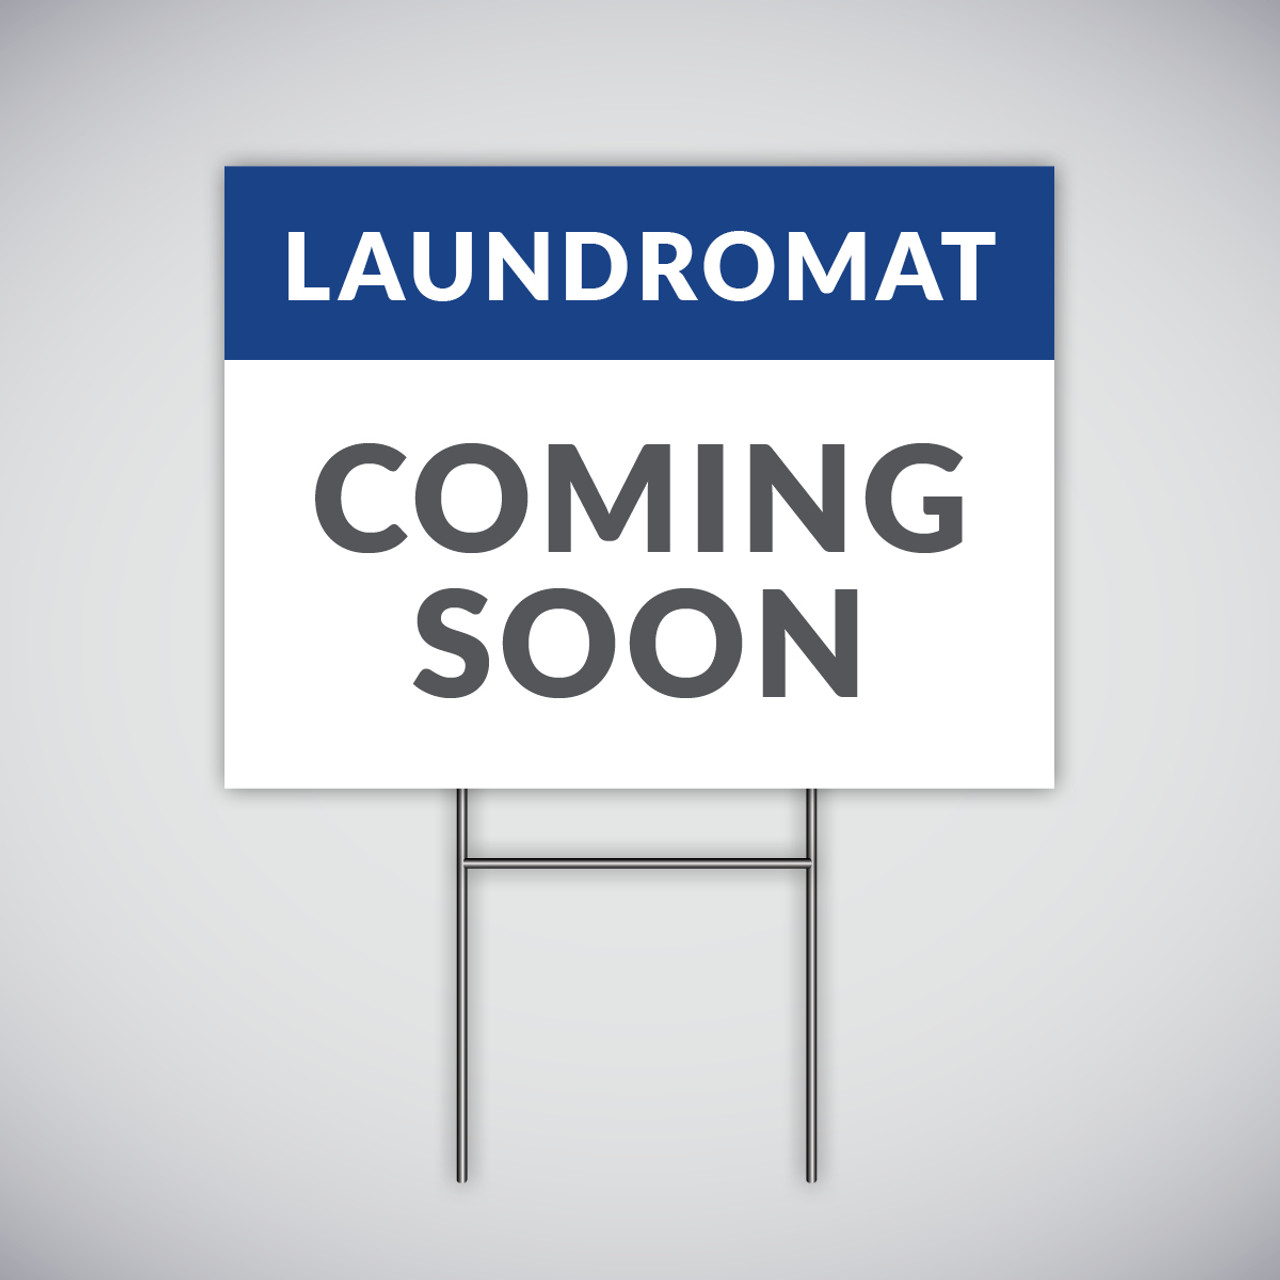 Laundromat Coming Soon Yard Sign - Blue